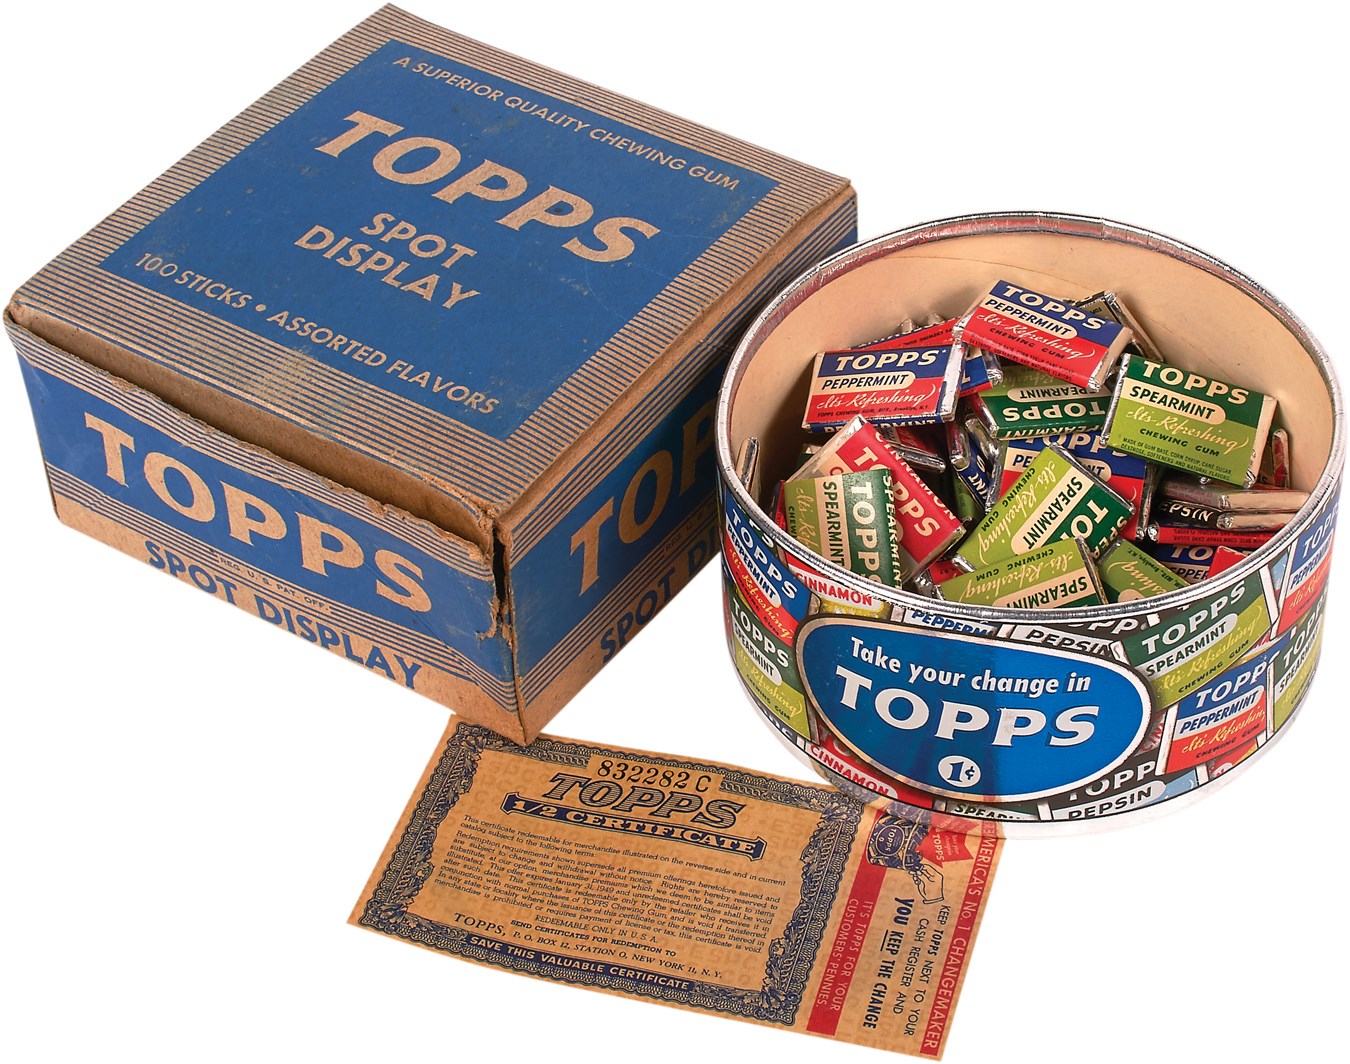 Baseball and Trading Cards - 1940s Topps Display Box with Original Unopened Gum